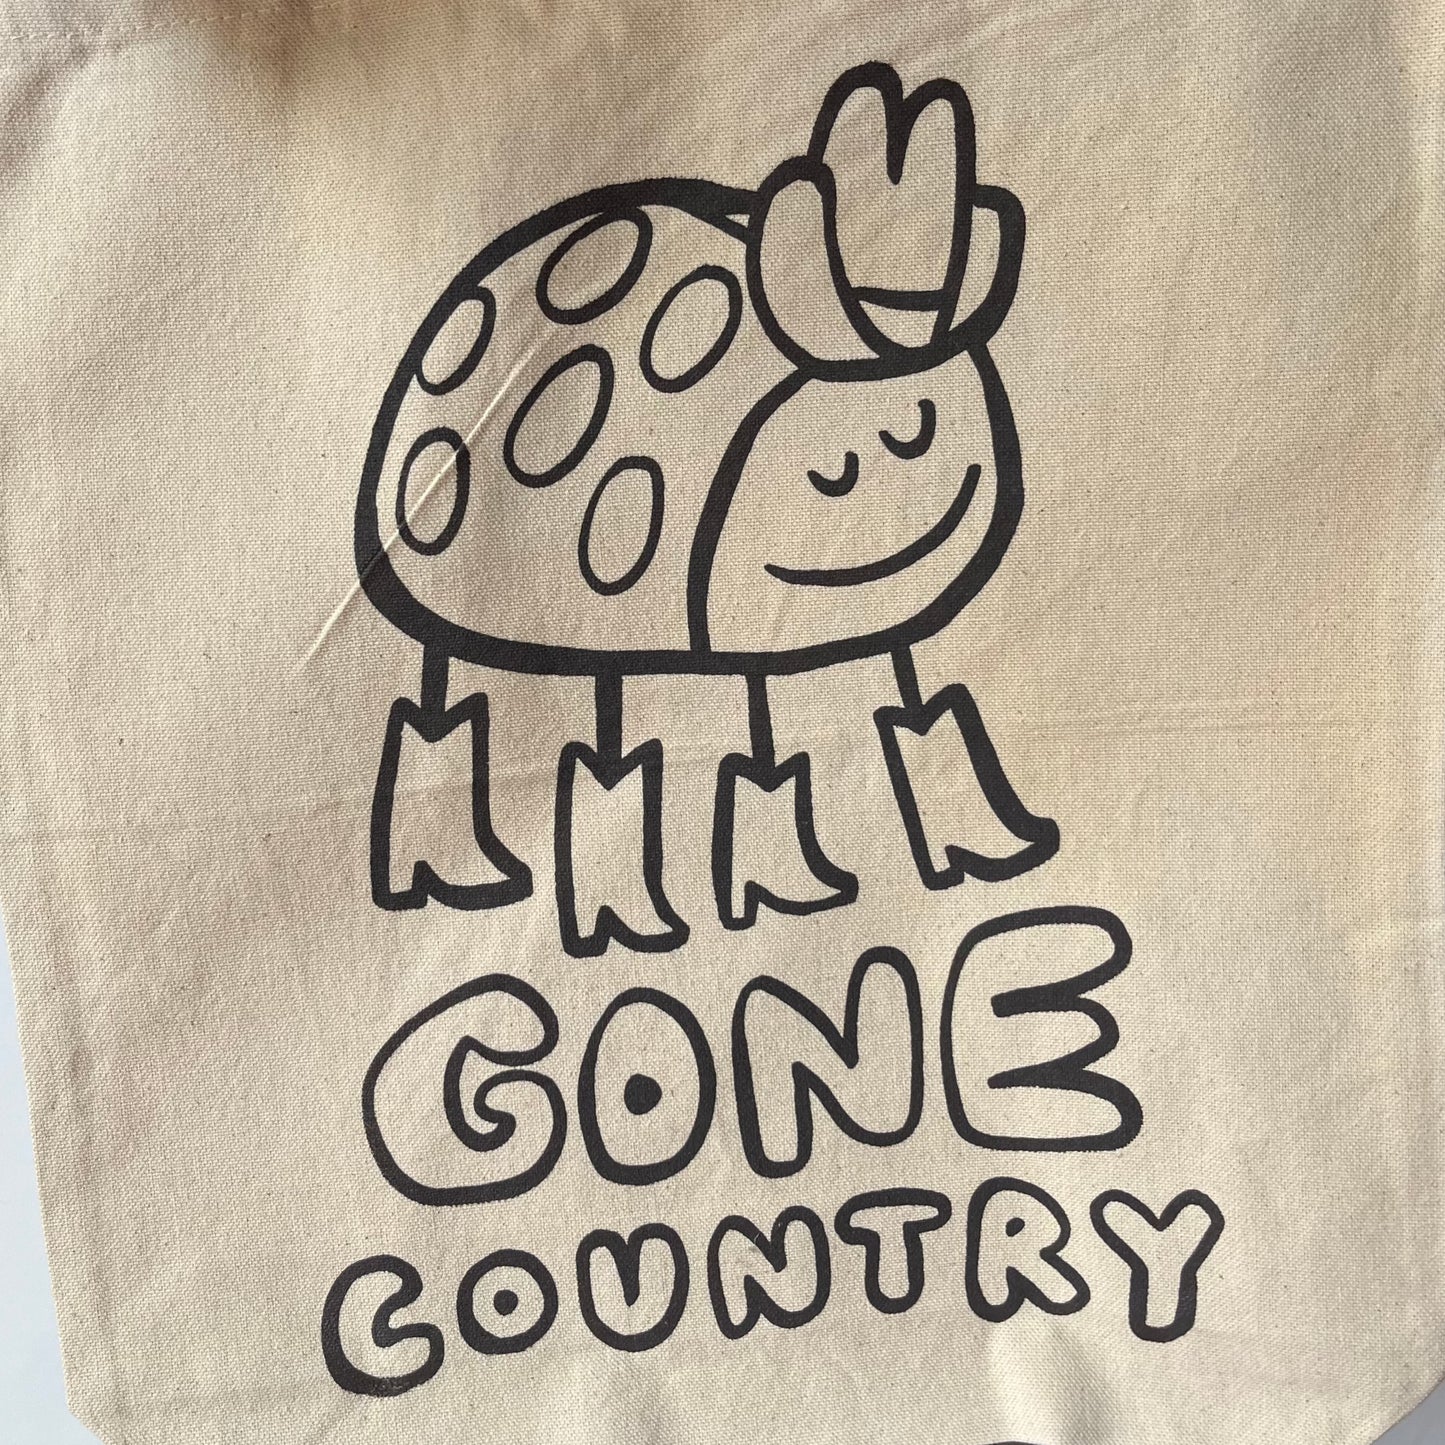 Gone Country Tote Bag